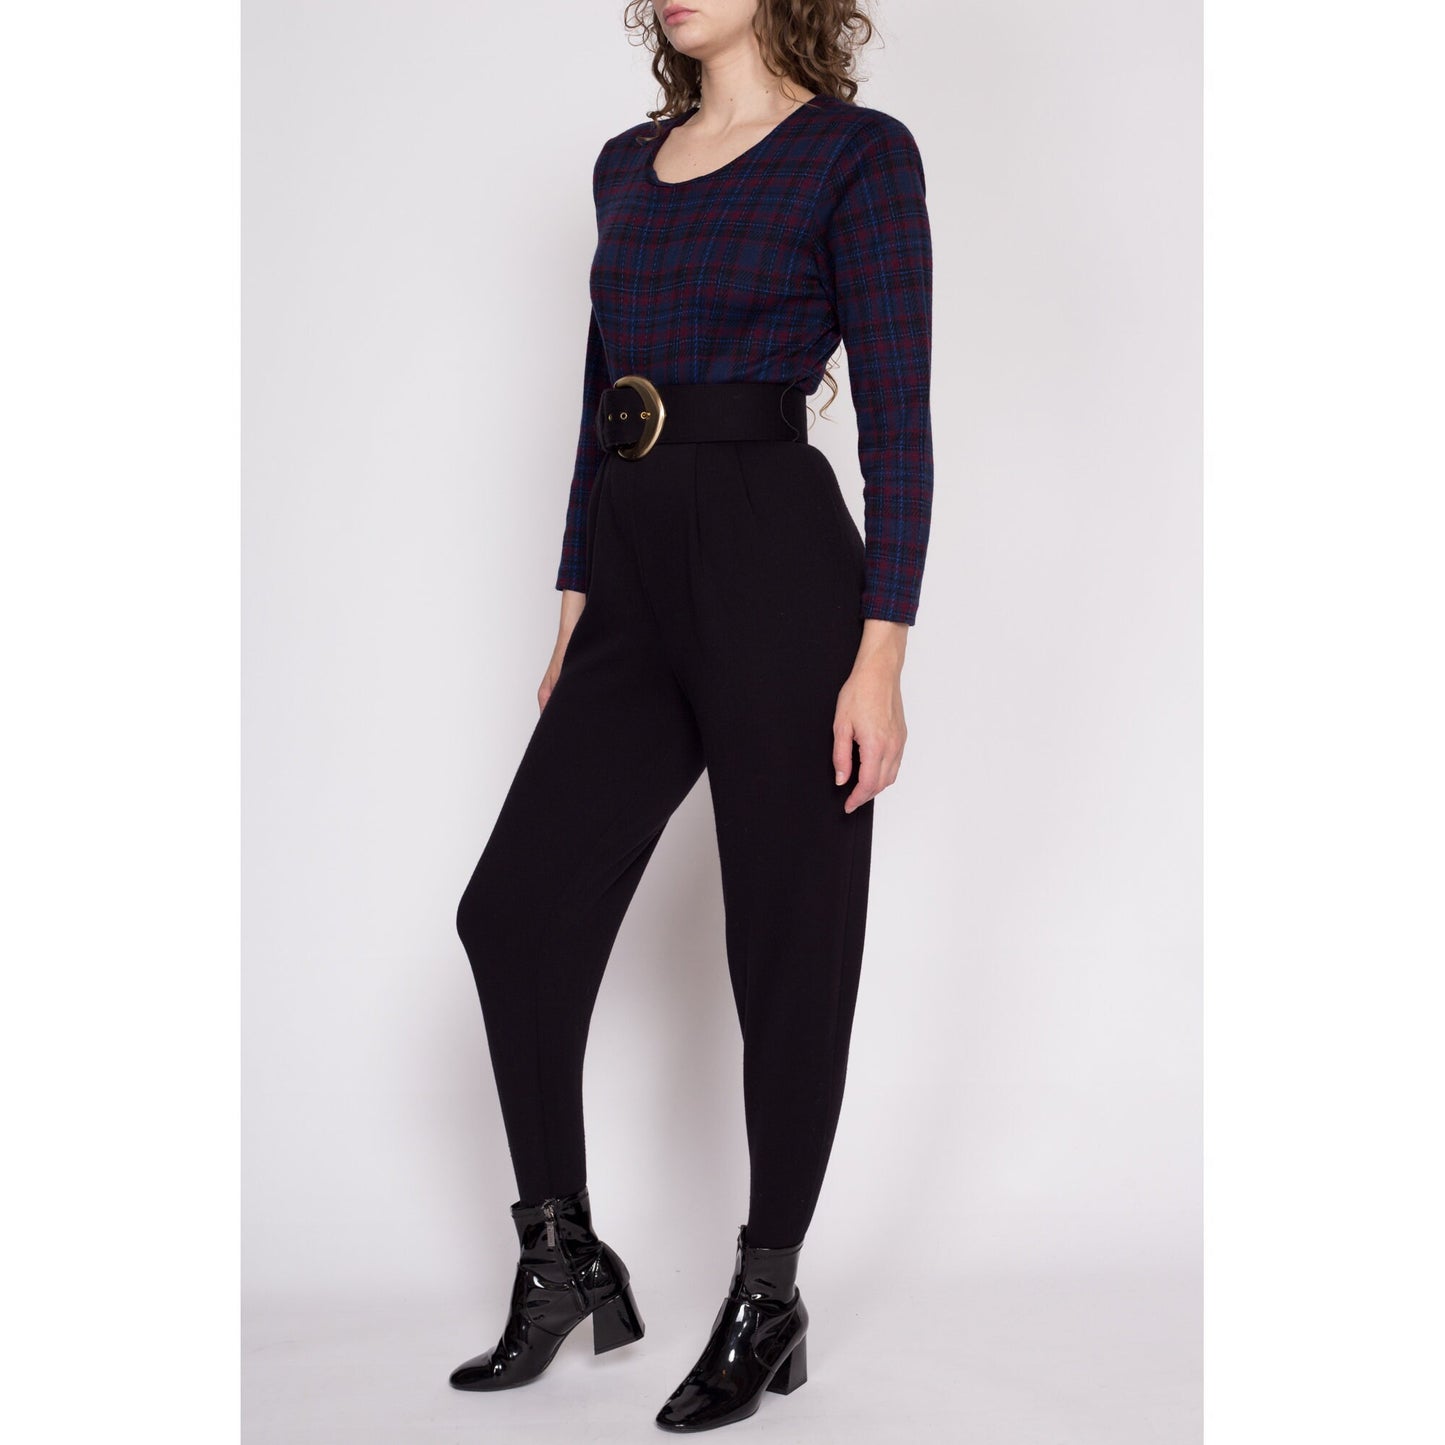 S-M | 80s Plaid Belted Stirrup Jumpsuit - Small to Medium | Vintage Black Long Sleeve Outfit